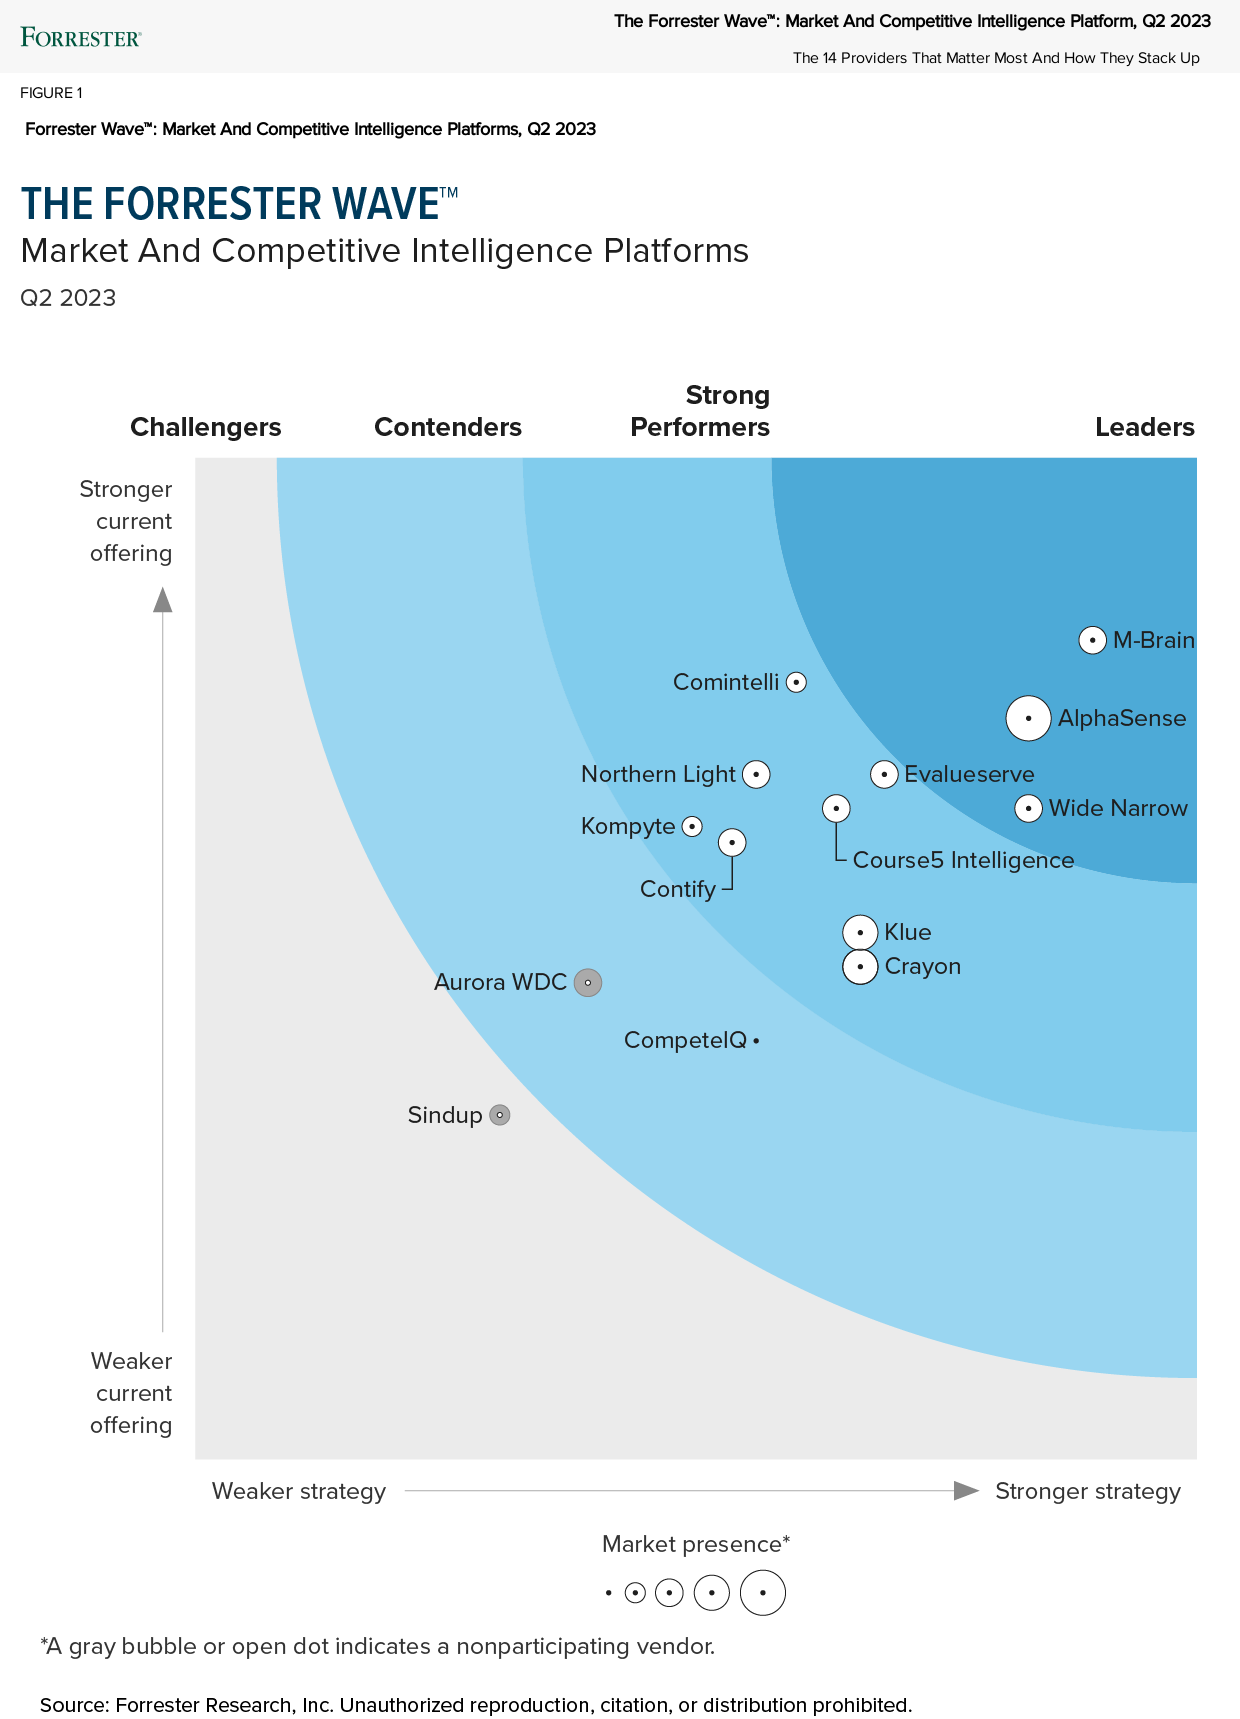 MBrain named leader in Forrester Market and Competitive Intelligence